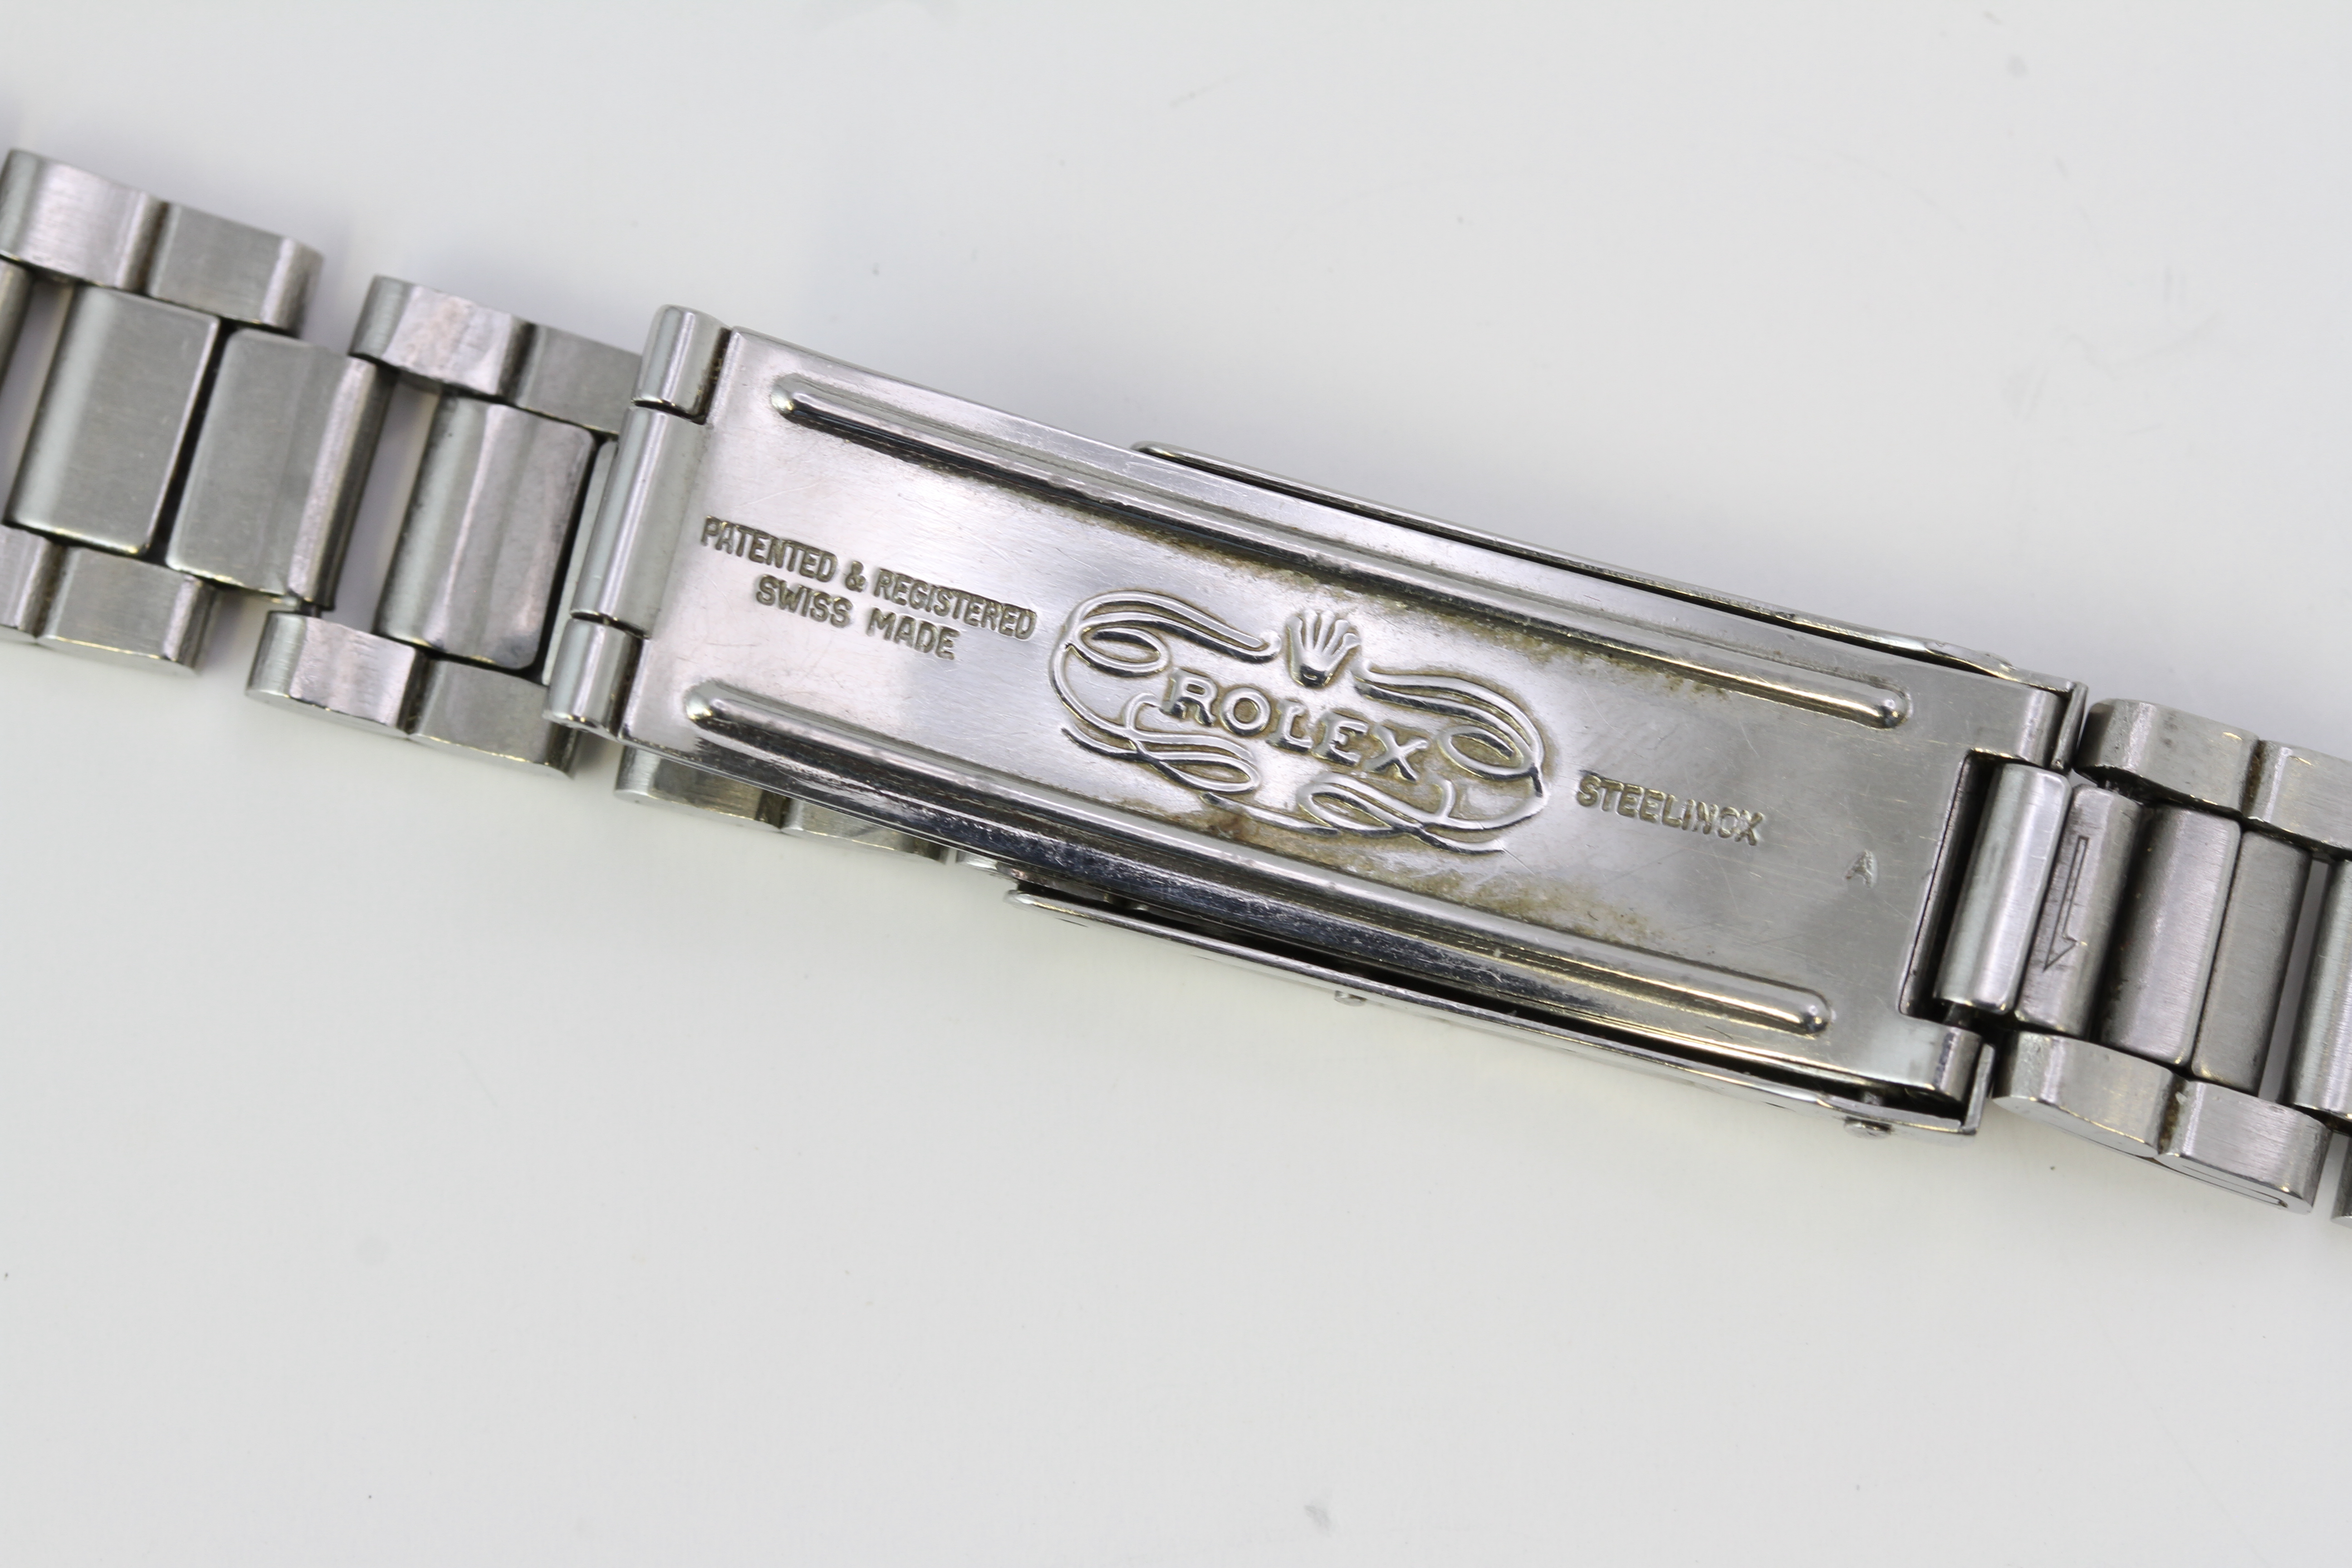 VINTAGE ROLEX OYSTERDATE REFERENCE 6694 CIRCA 1969 - Image 6 of 7